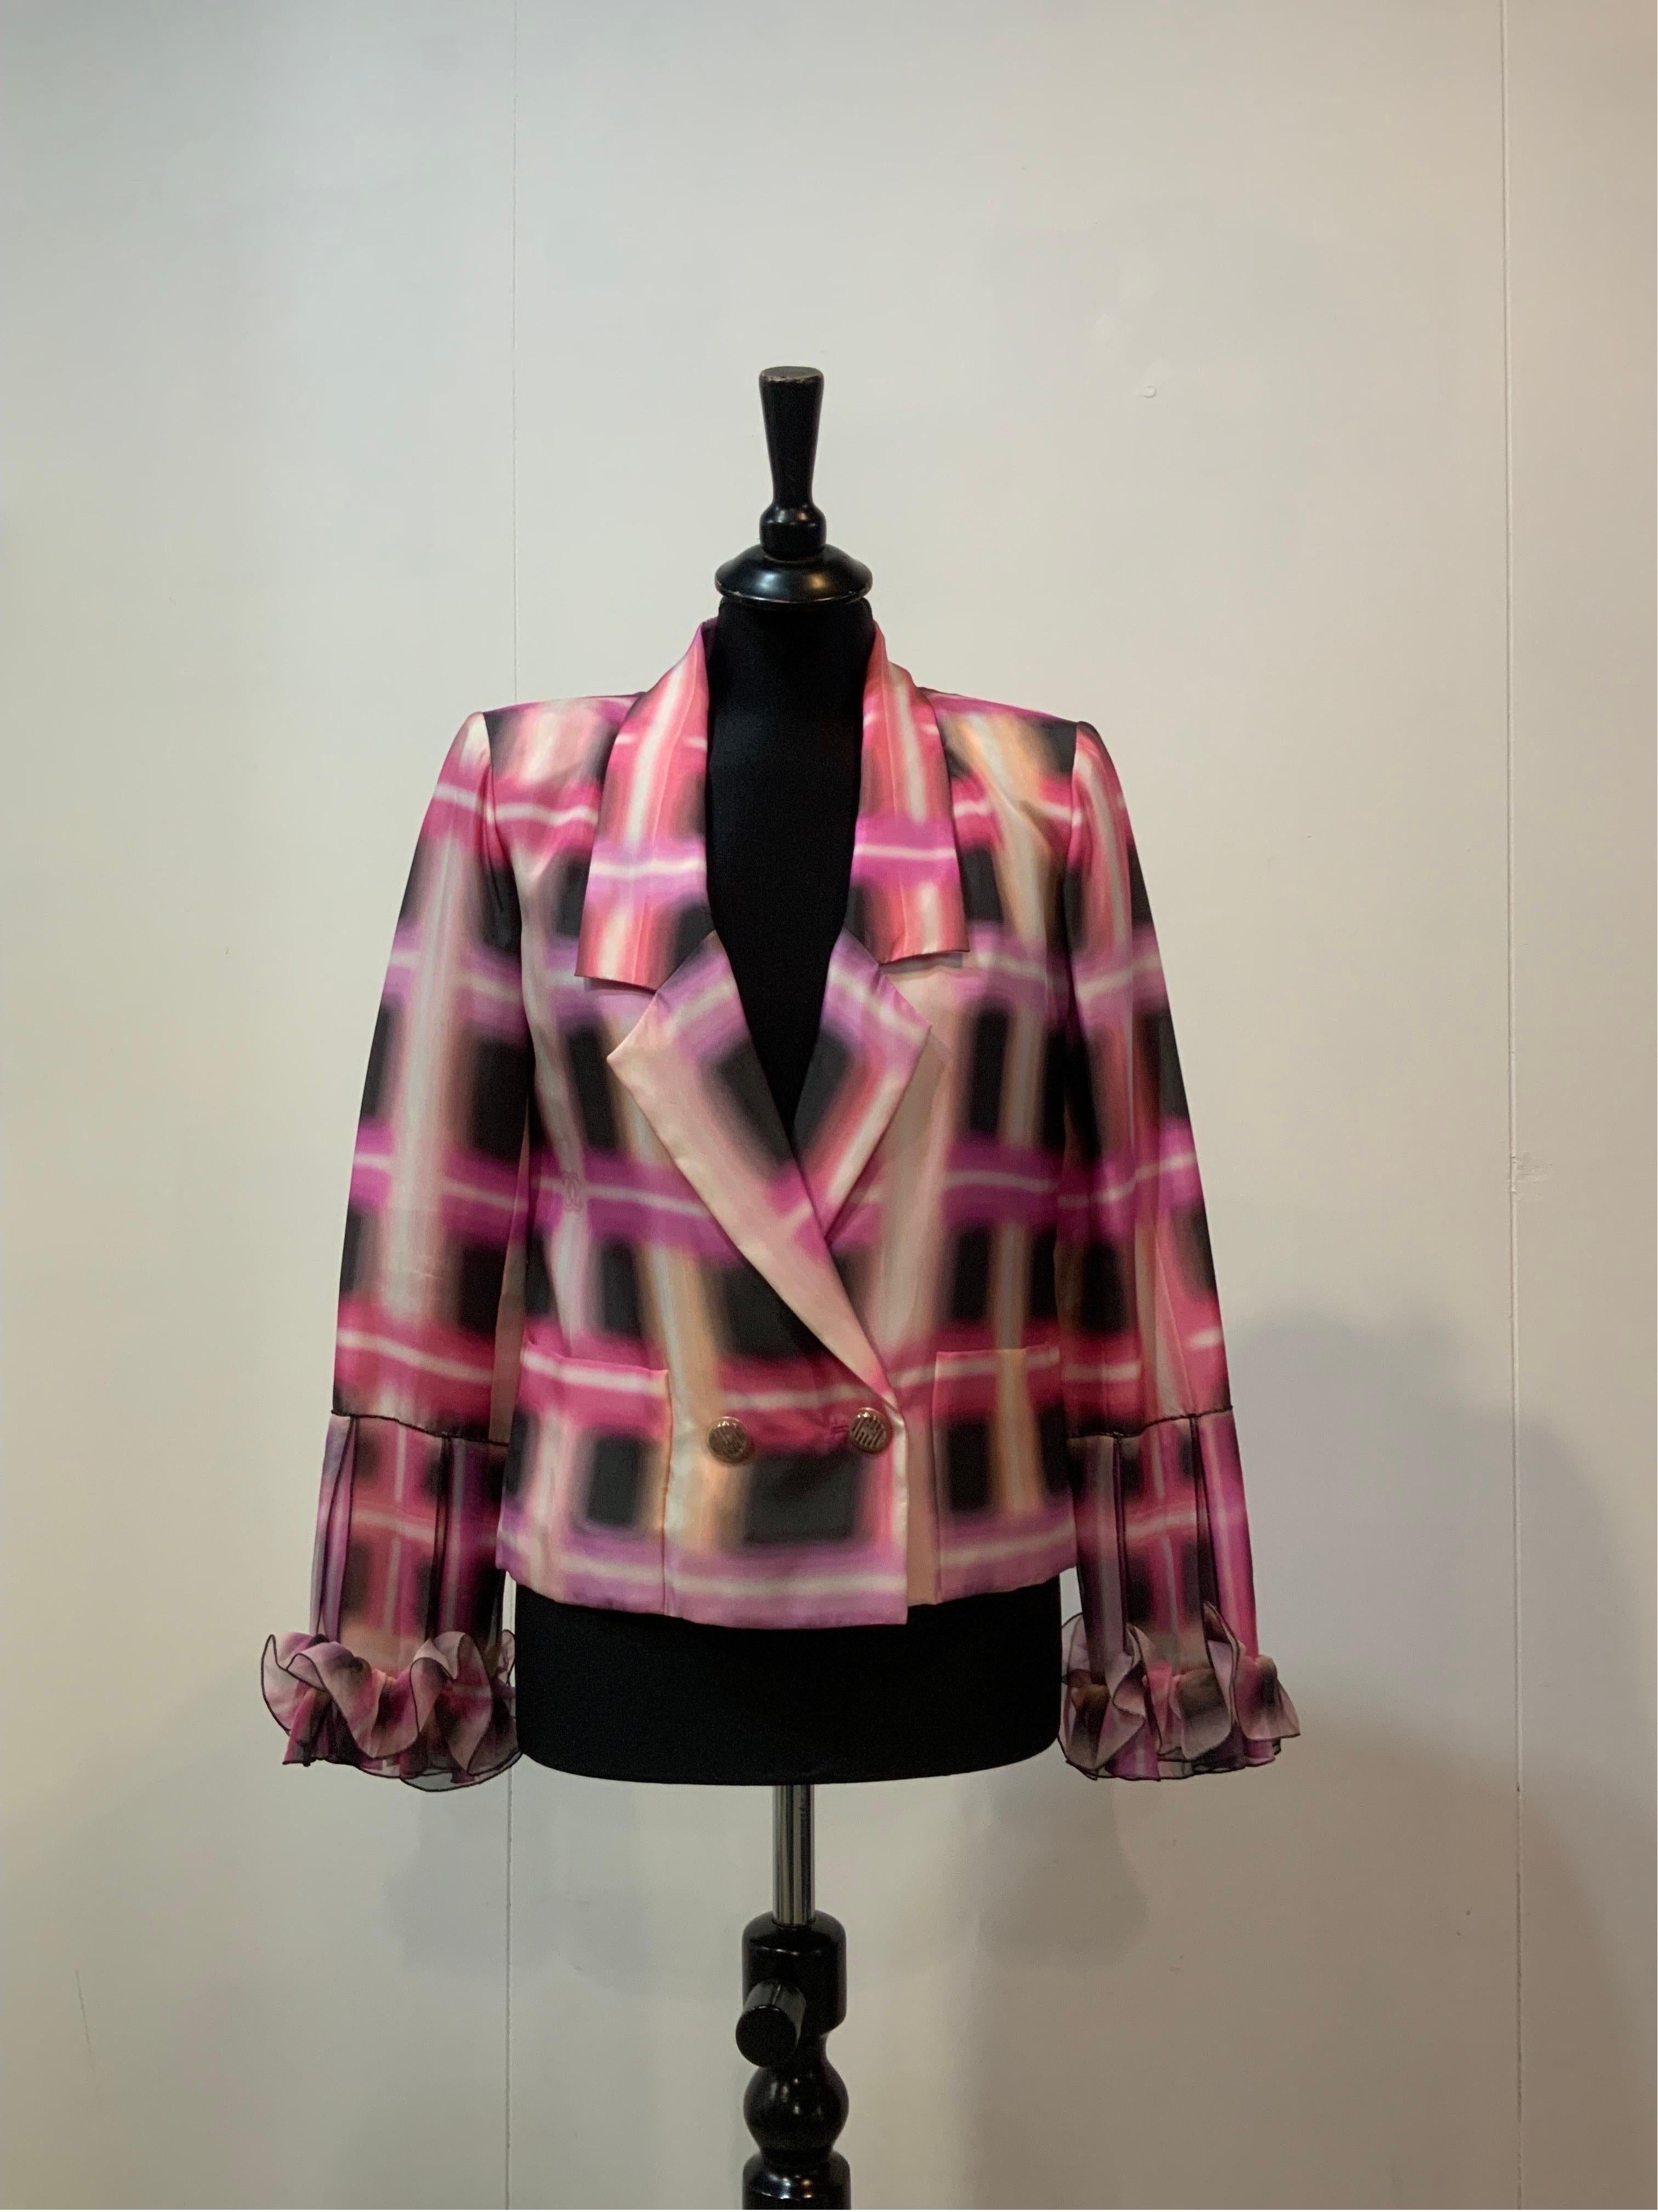 CHANEL NEON PINK JACKET.
Spring 2017 Ready to Wear
Chanel double-breasted jacket. Pink neon pattern.
In silk. Very beautiful colors.
Features padded shoulder straps.
French size 34 which corresponds to an Italian 38.
Shoulders 40 cm
Bust 44